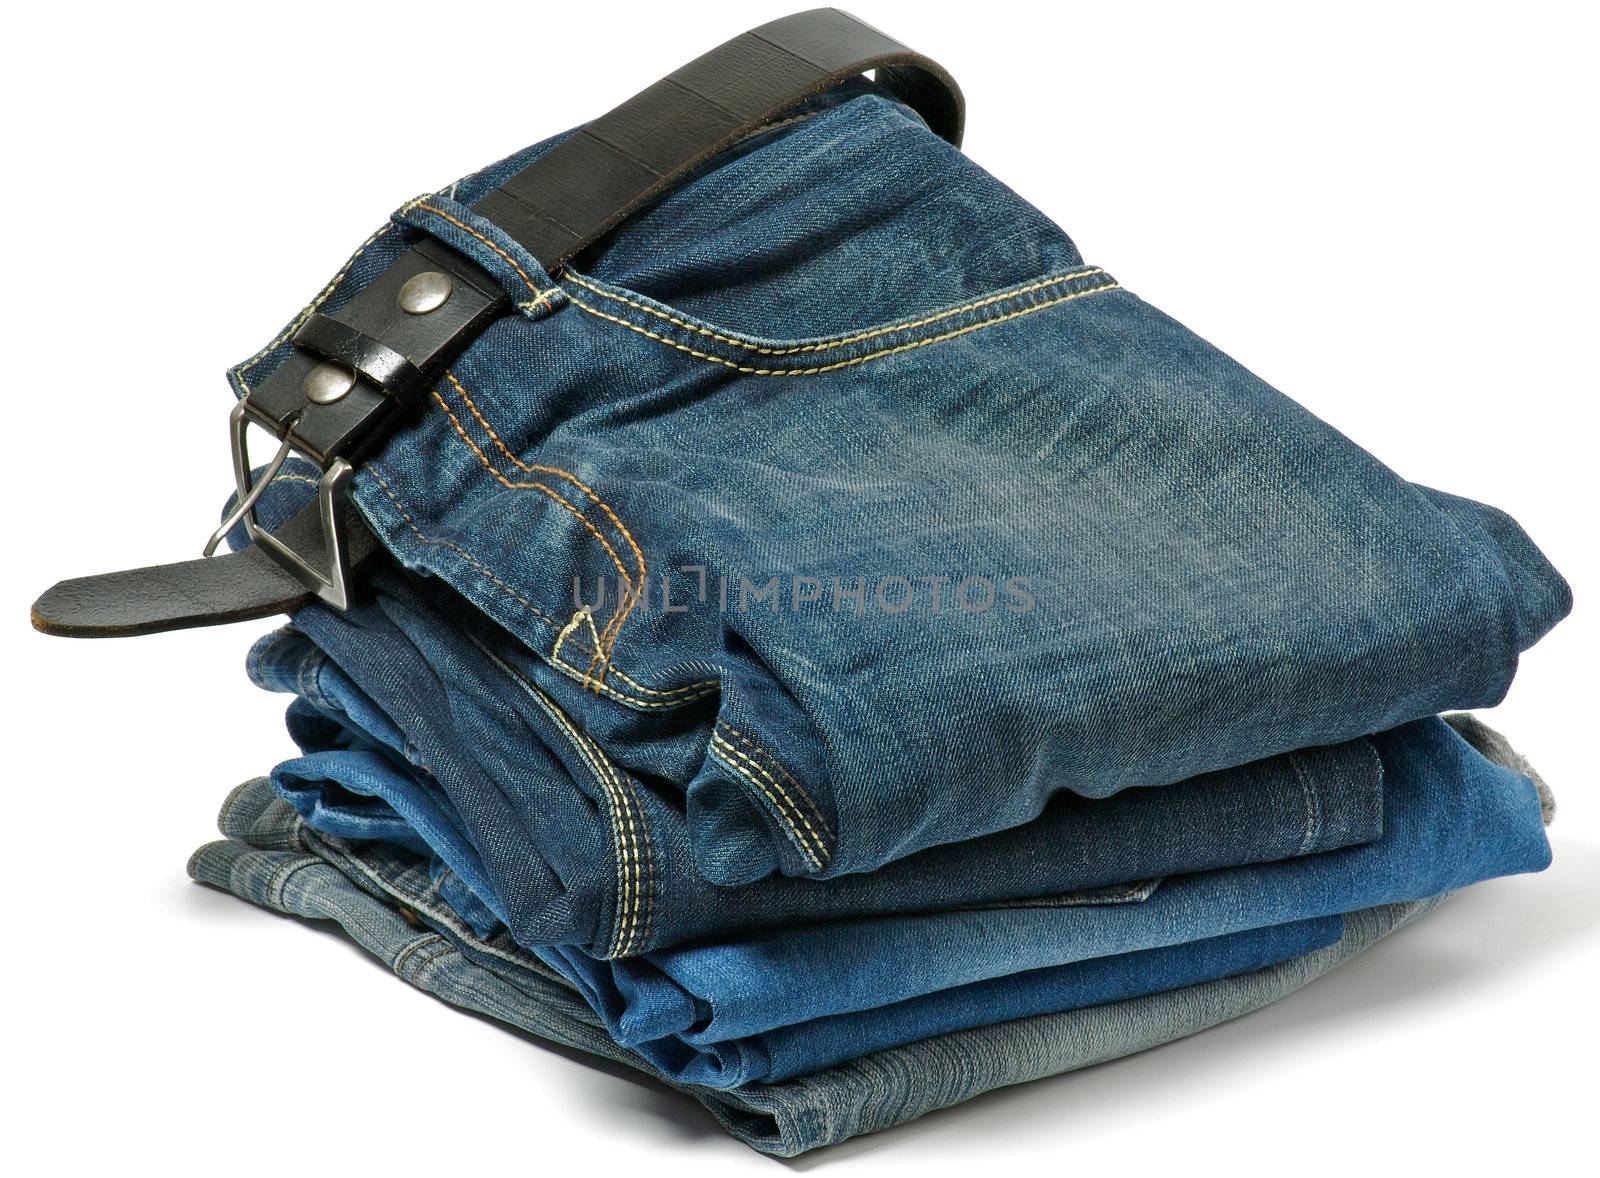 Stack of Old jeans and Belt by zhekos